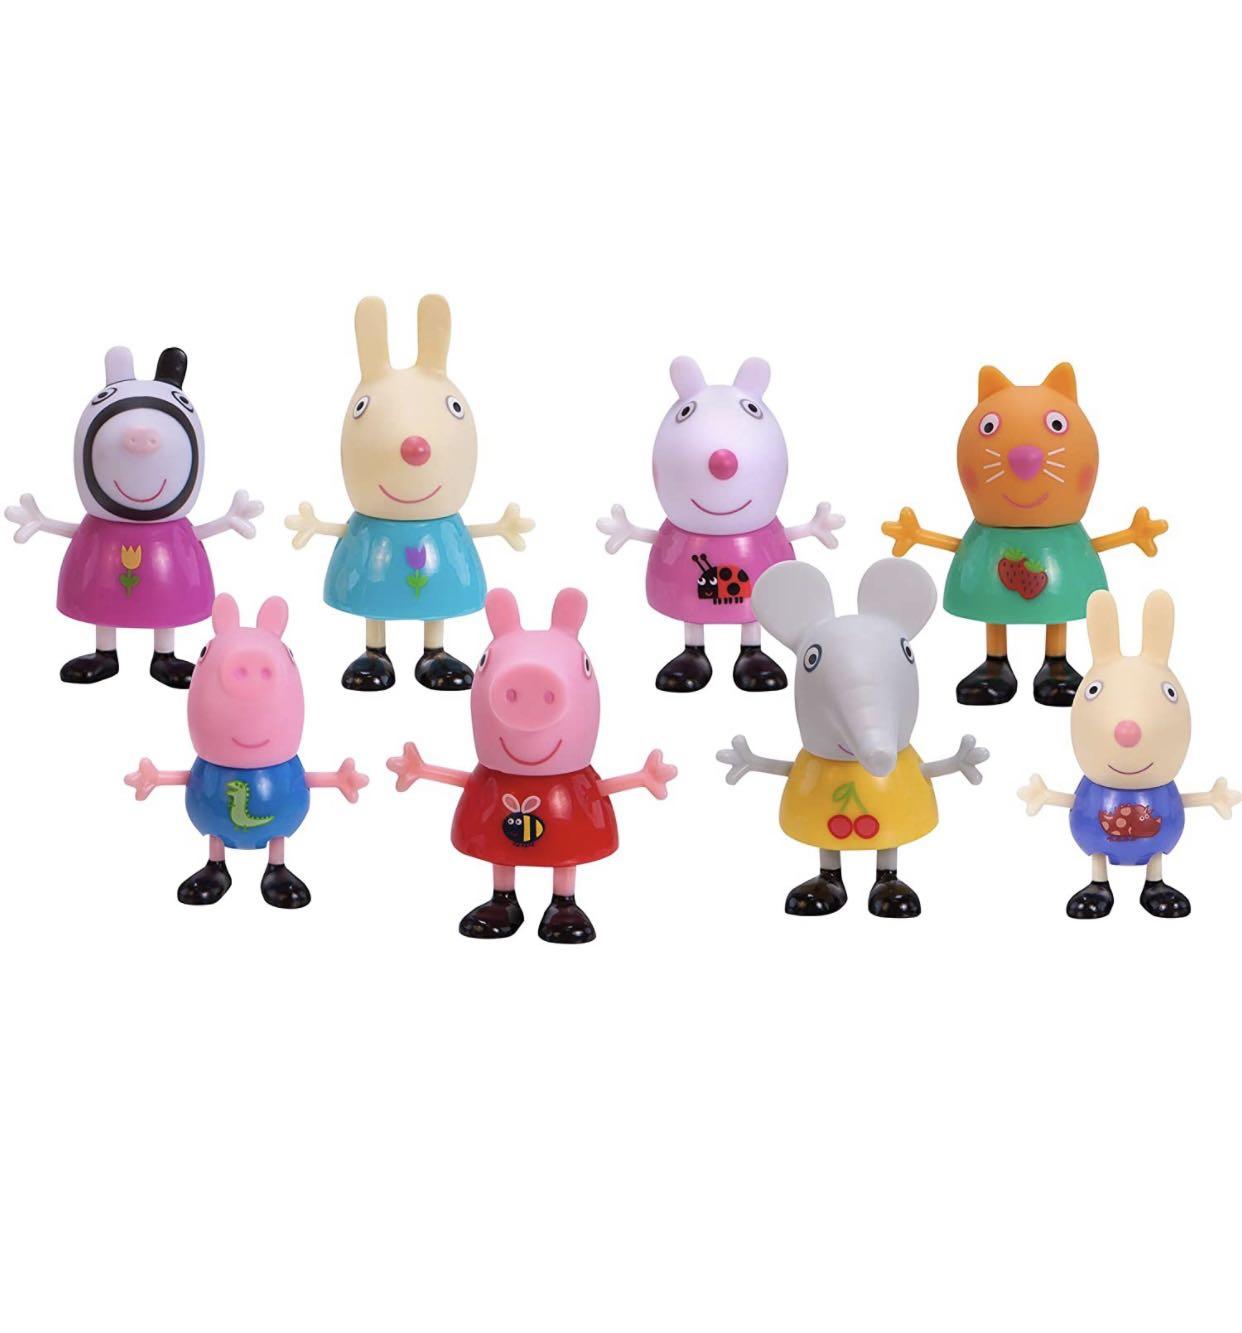 peppa pig rebecca rabbit comes to play